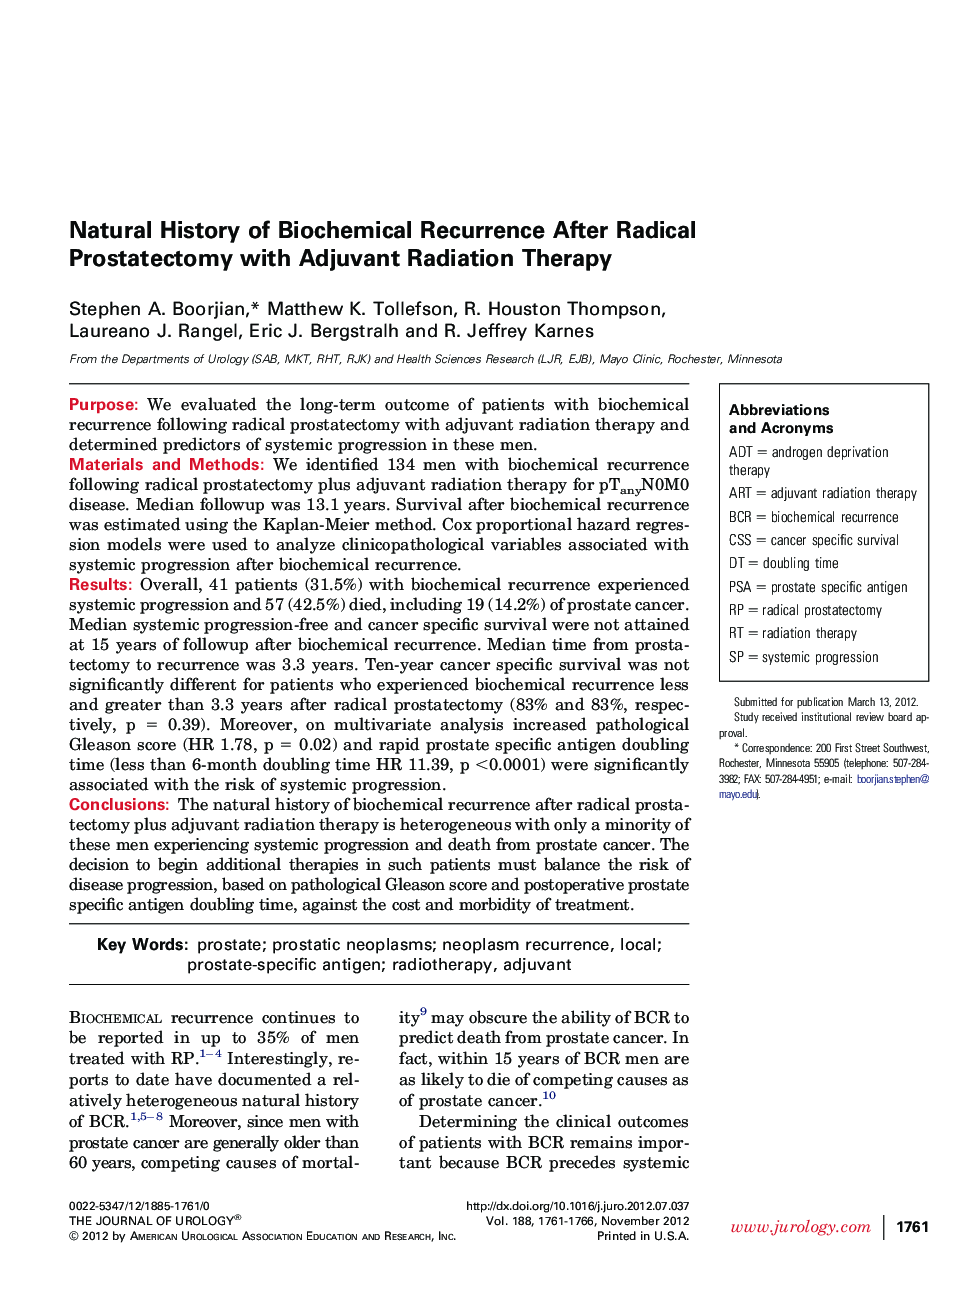 Natural History of Biochemical Recurrence After Radical Prostatectomy with Adjuvant Radiation Therapy 